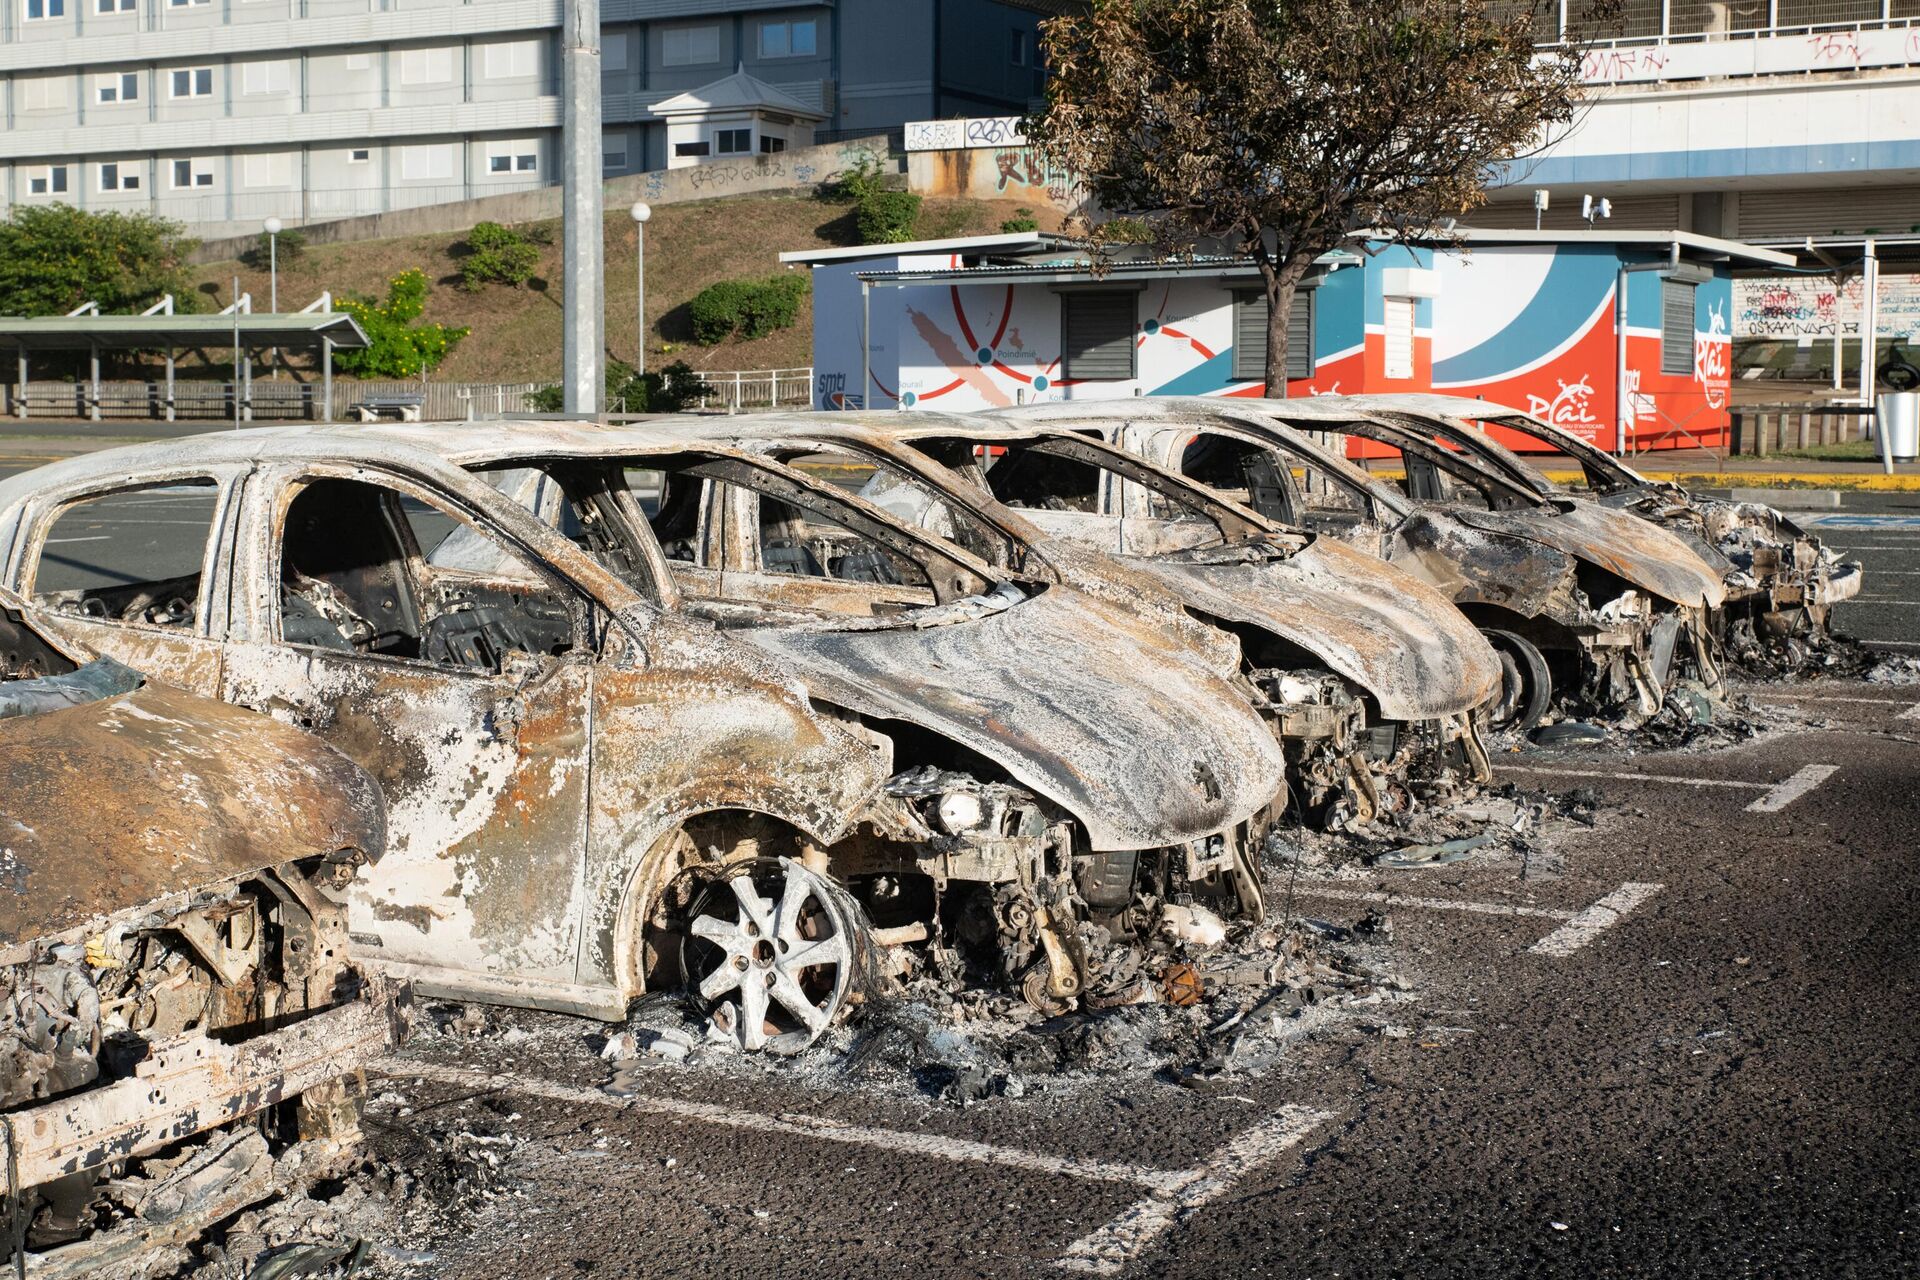 Burnt-out cars in the parking lot of the old hospital on the outskirts of Noumea on May 16, 2024, amid protests linked to a debate on a constitutional bill aimed at enlarging the electorate for upcoming elections of the overseas French territory of New Caledonia. - Sputnik International, 1920, 16.05.2024